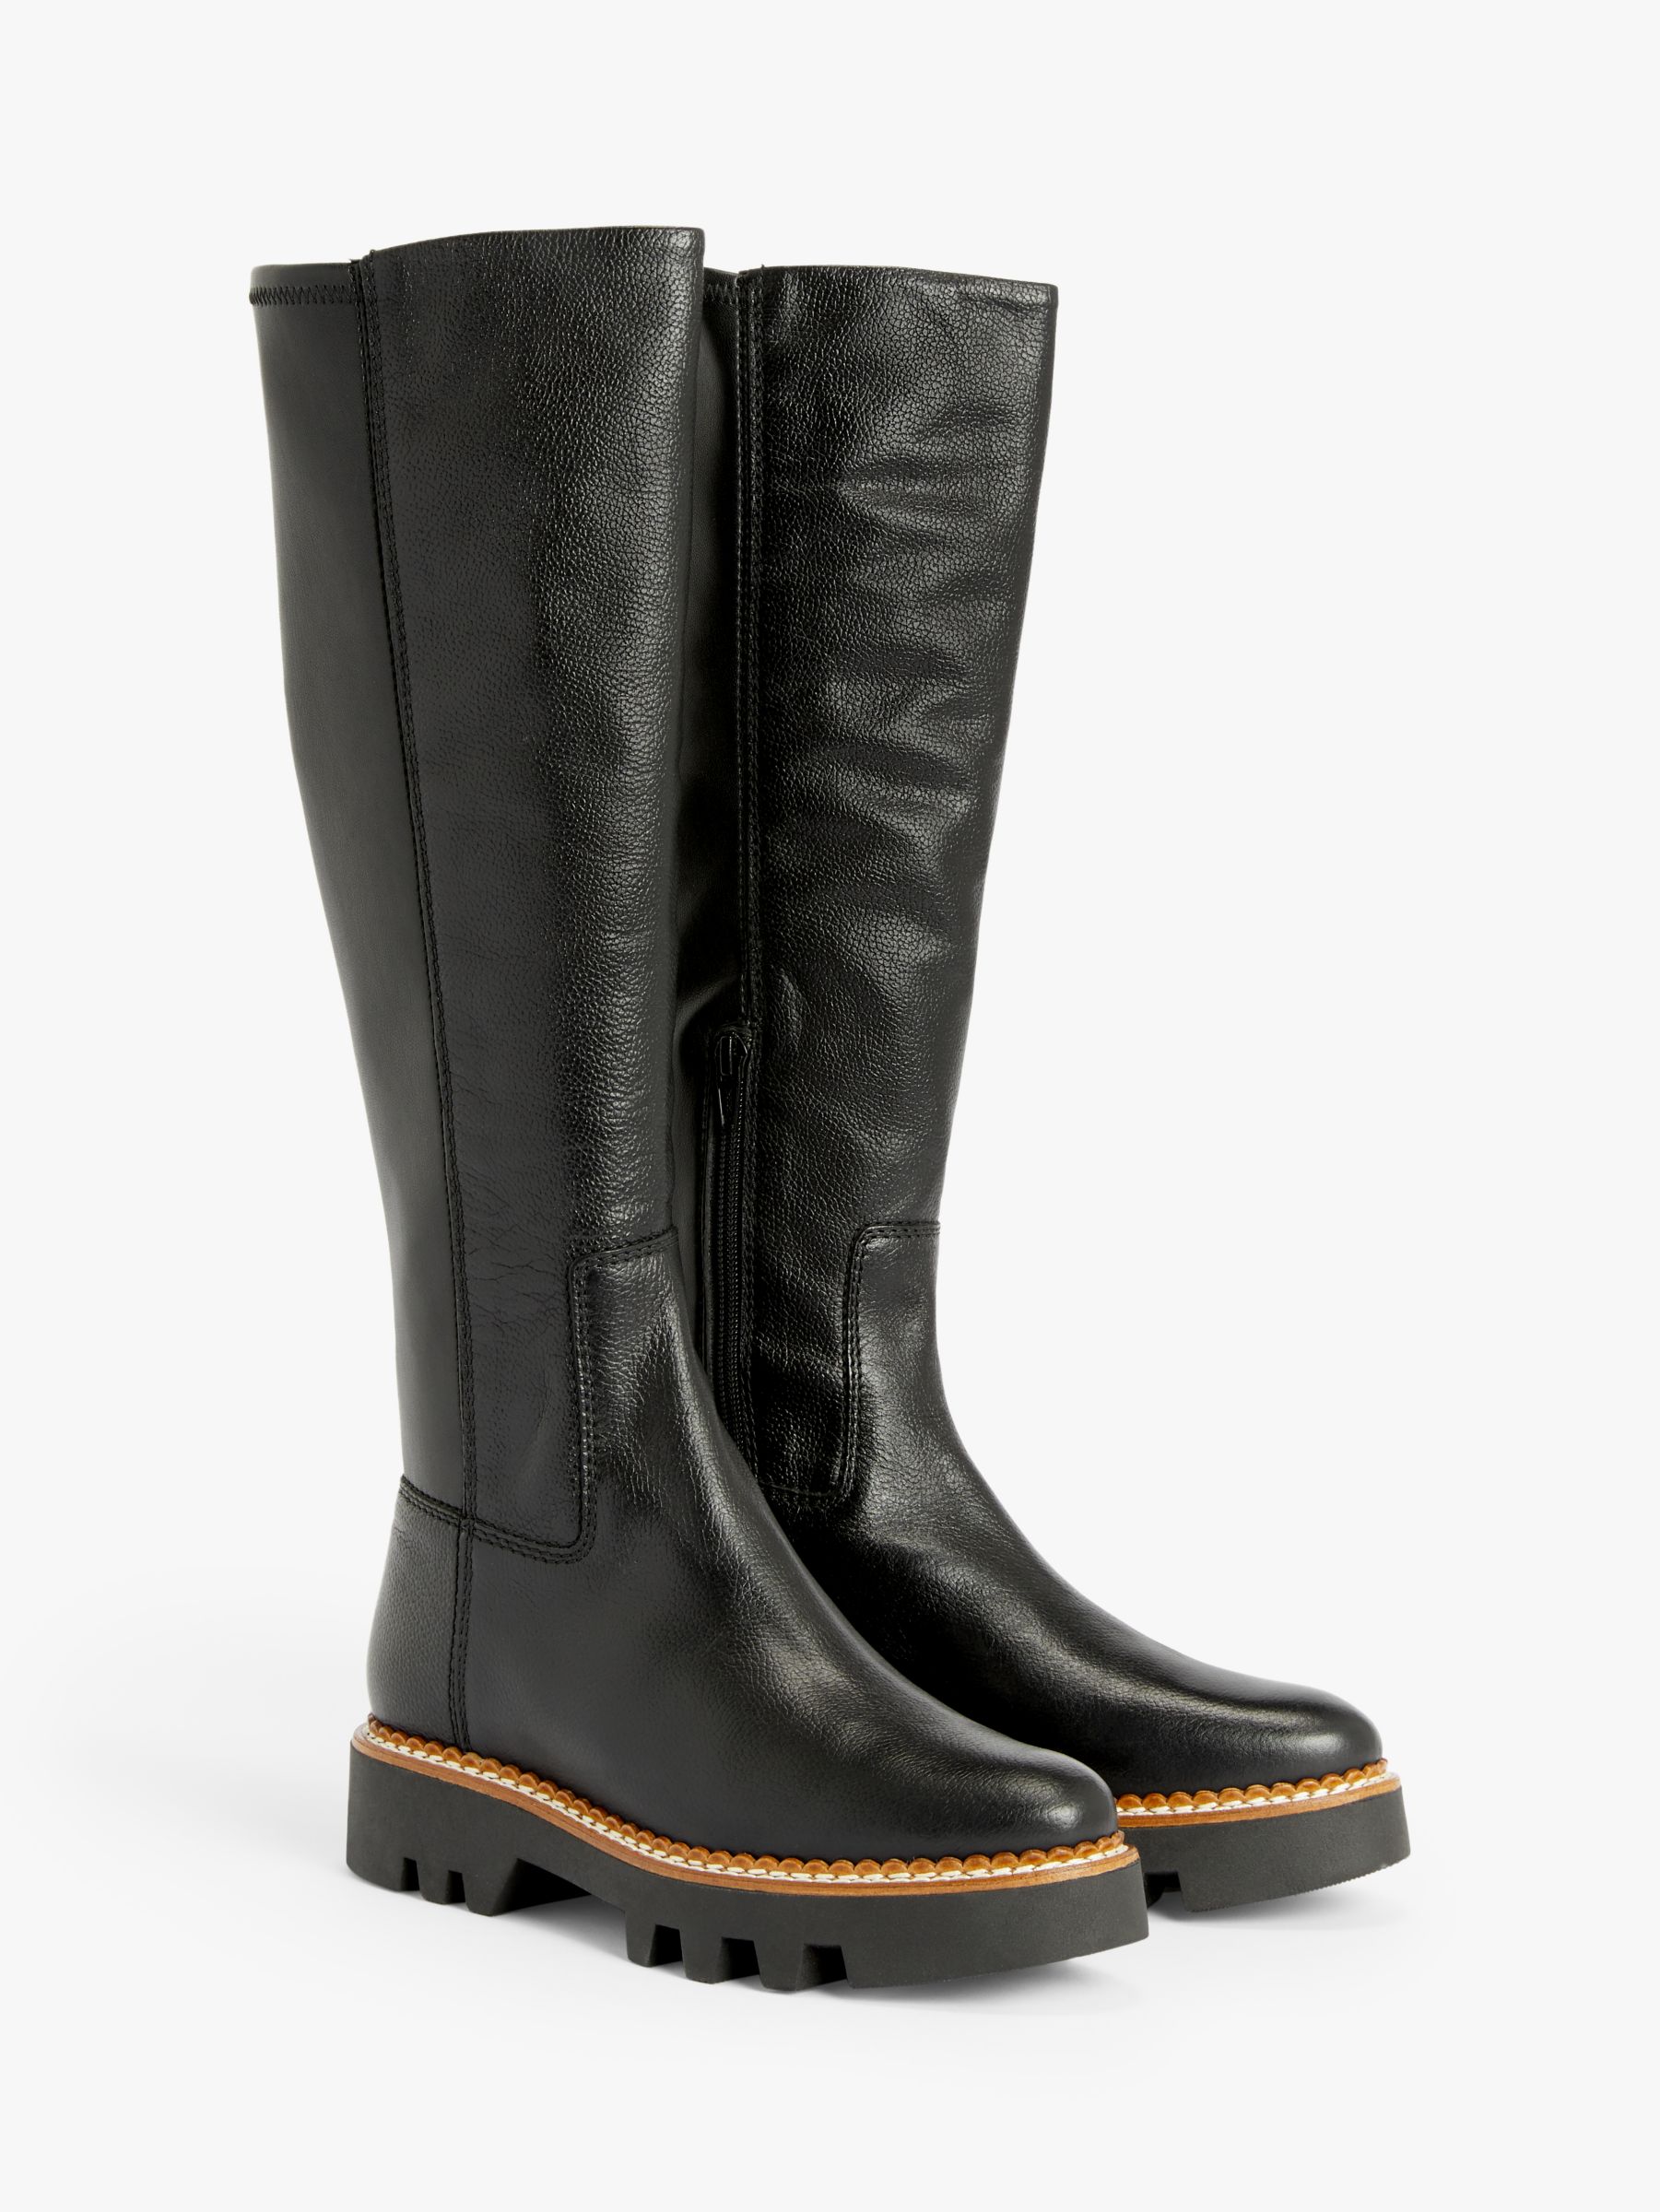 Kin Thea Leather Cleated Long Boots, Black at John Lewis & Partners